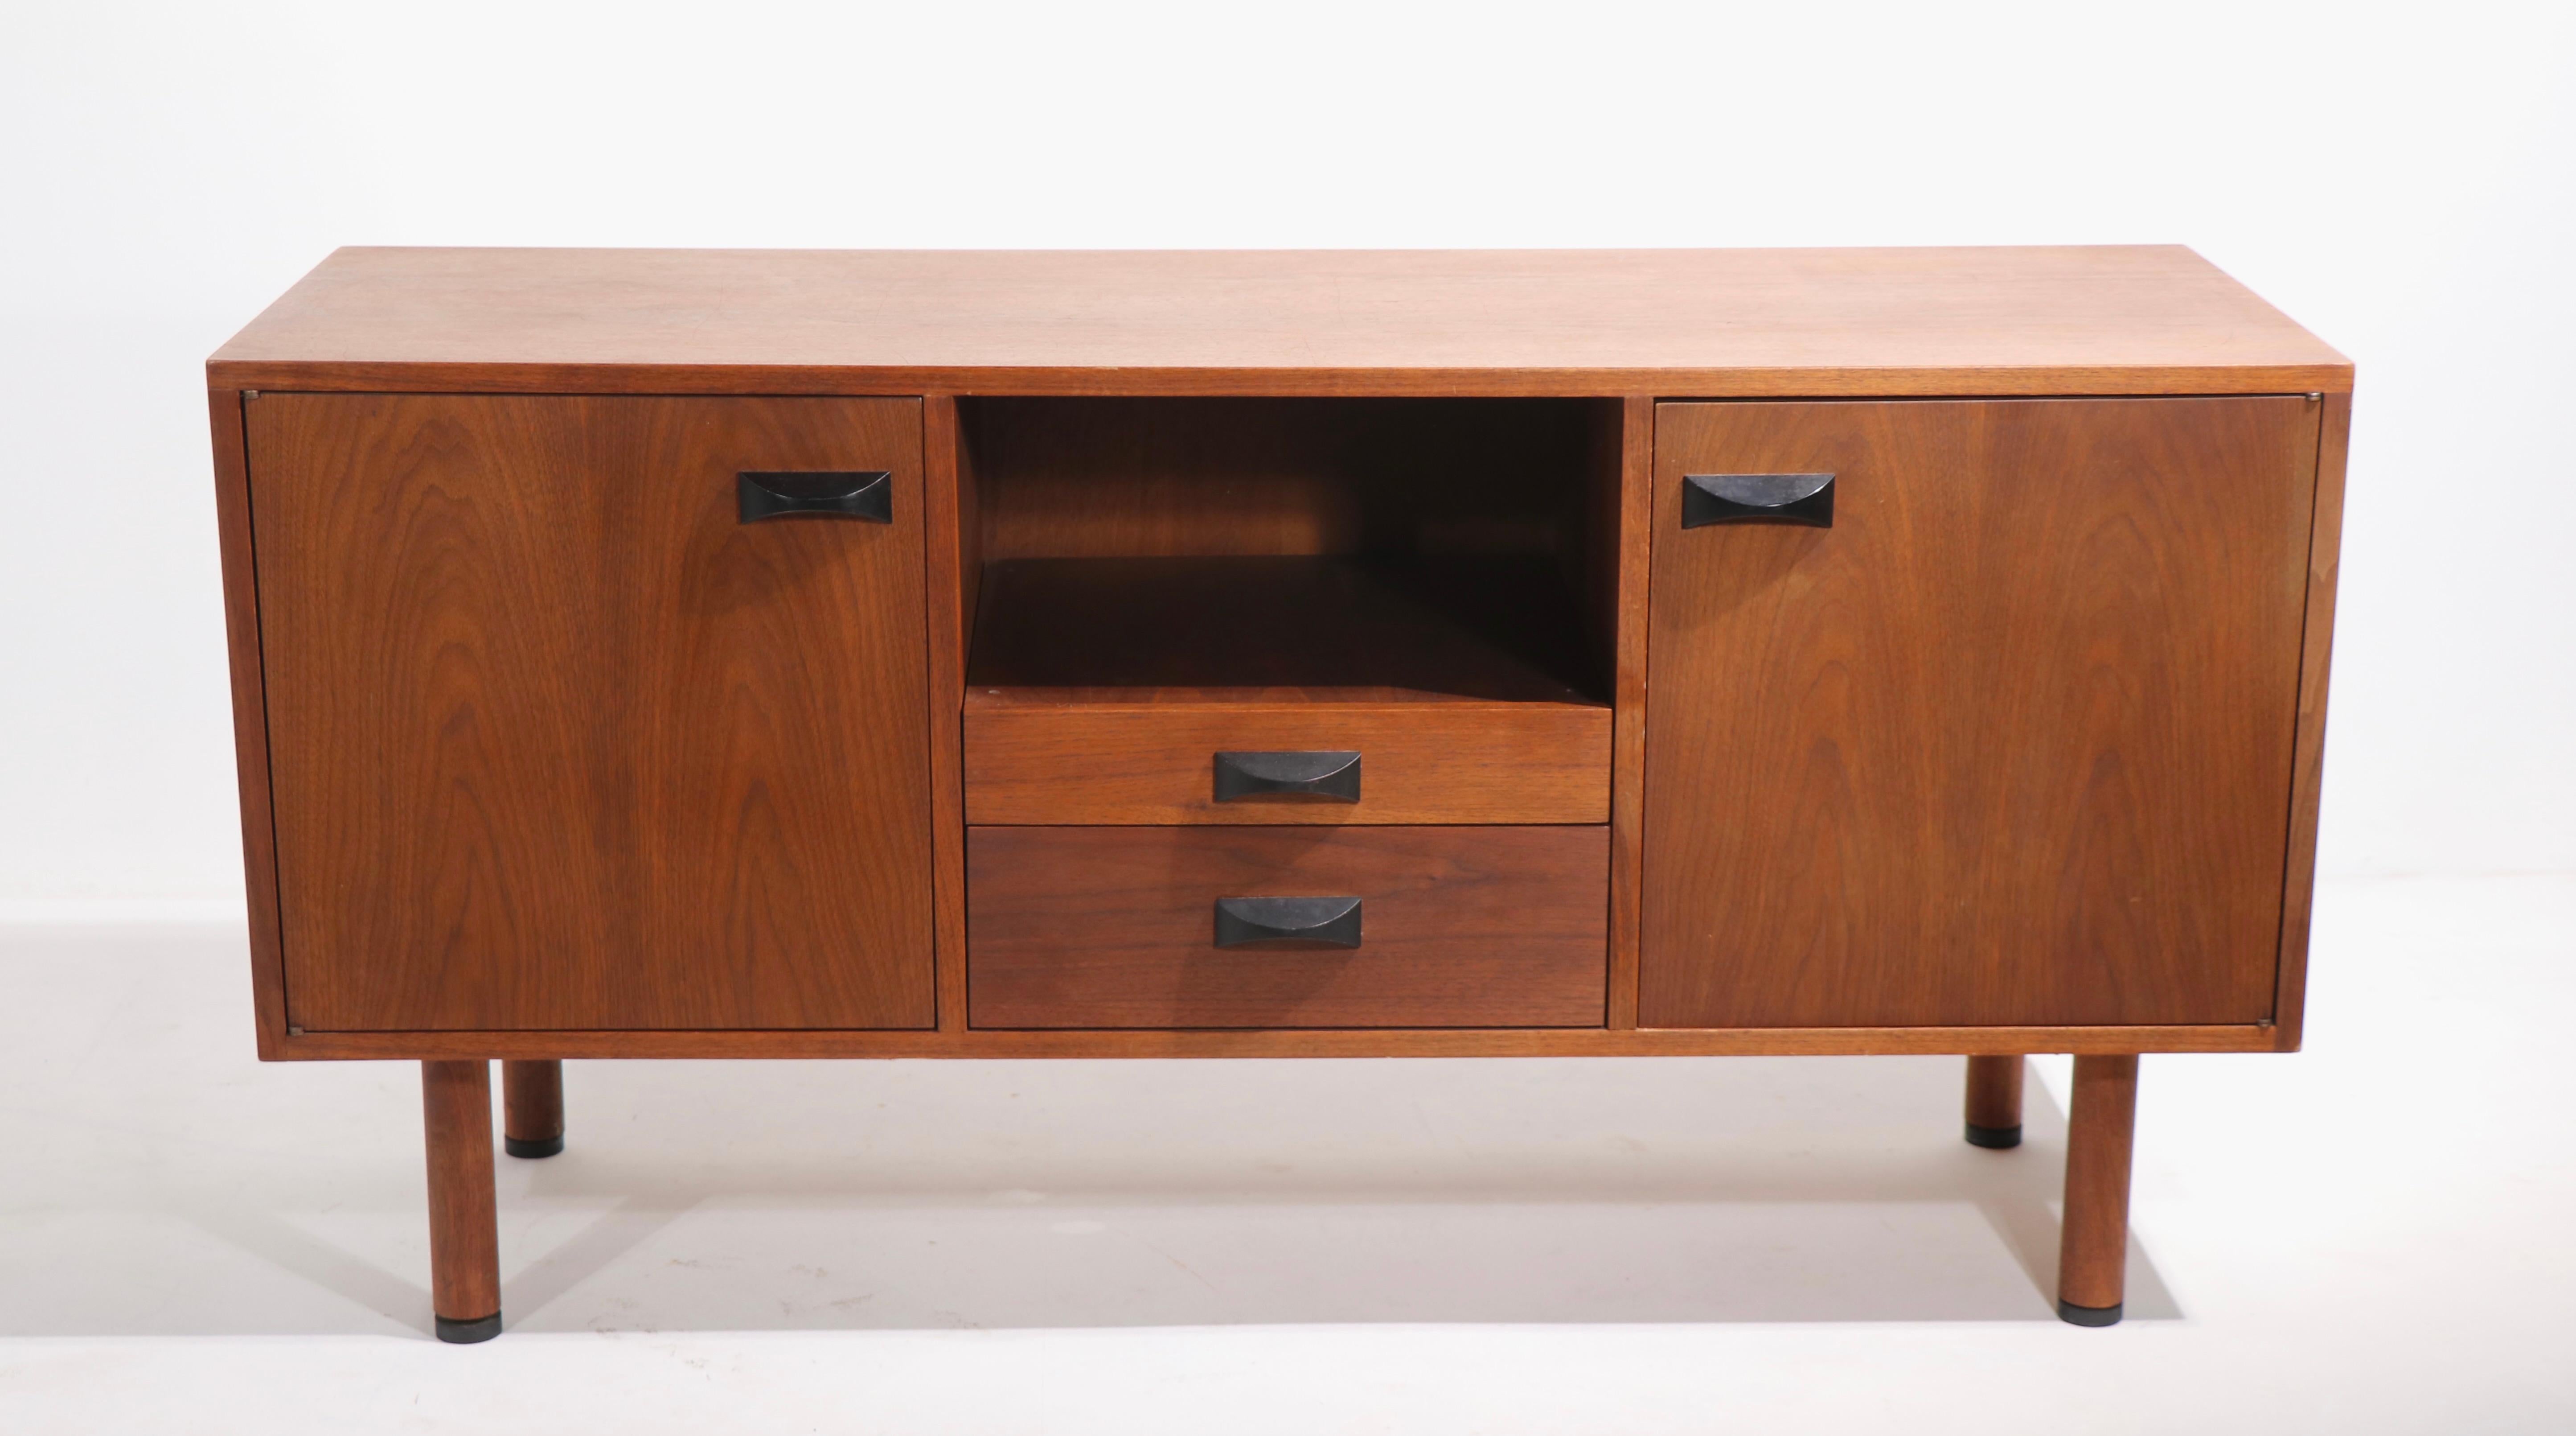 Stylish mid century sideboard, or possibly a file cabinet, this cabinet features an unusual pull out surface in the center, possibly for a turntable, printer, or other machine. Multi porpoise cabinet, suitable for Dining Room, Bedroom and office